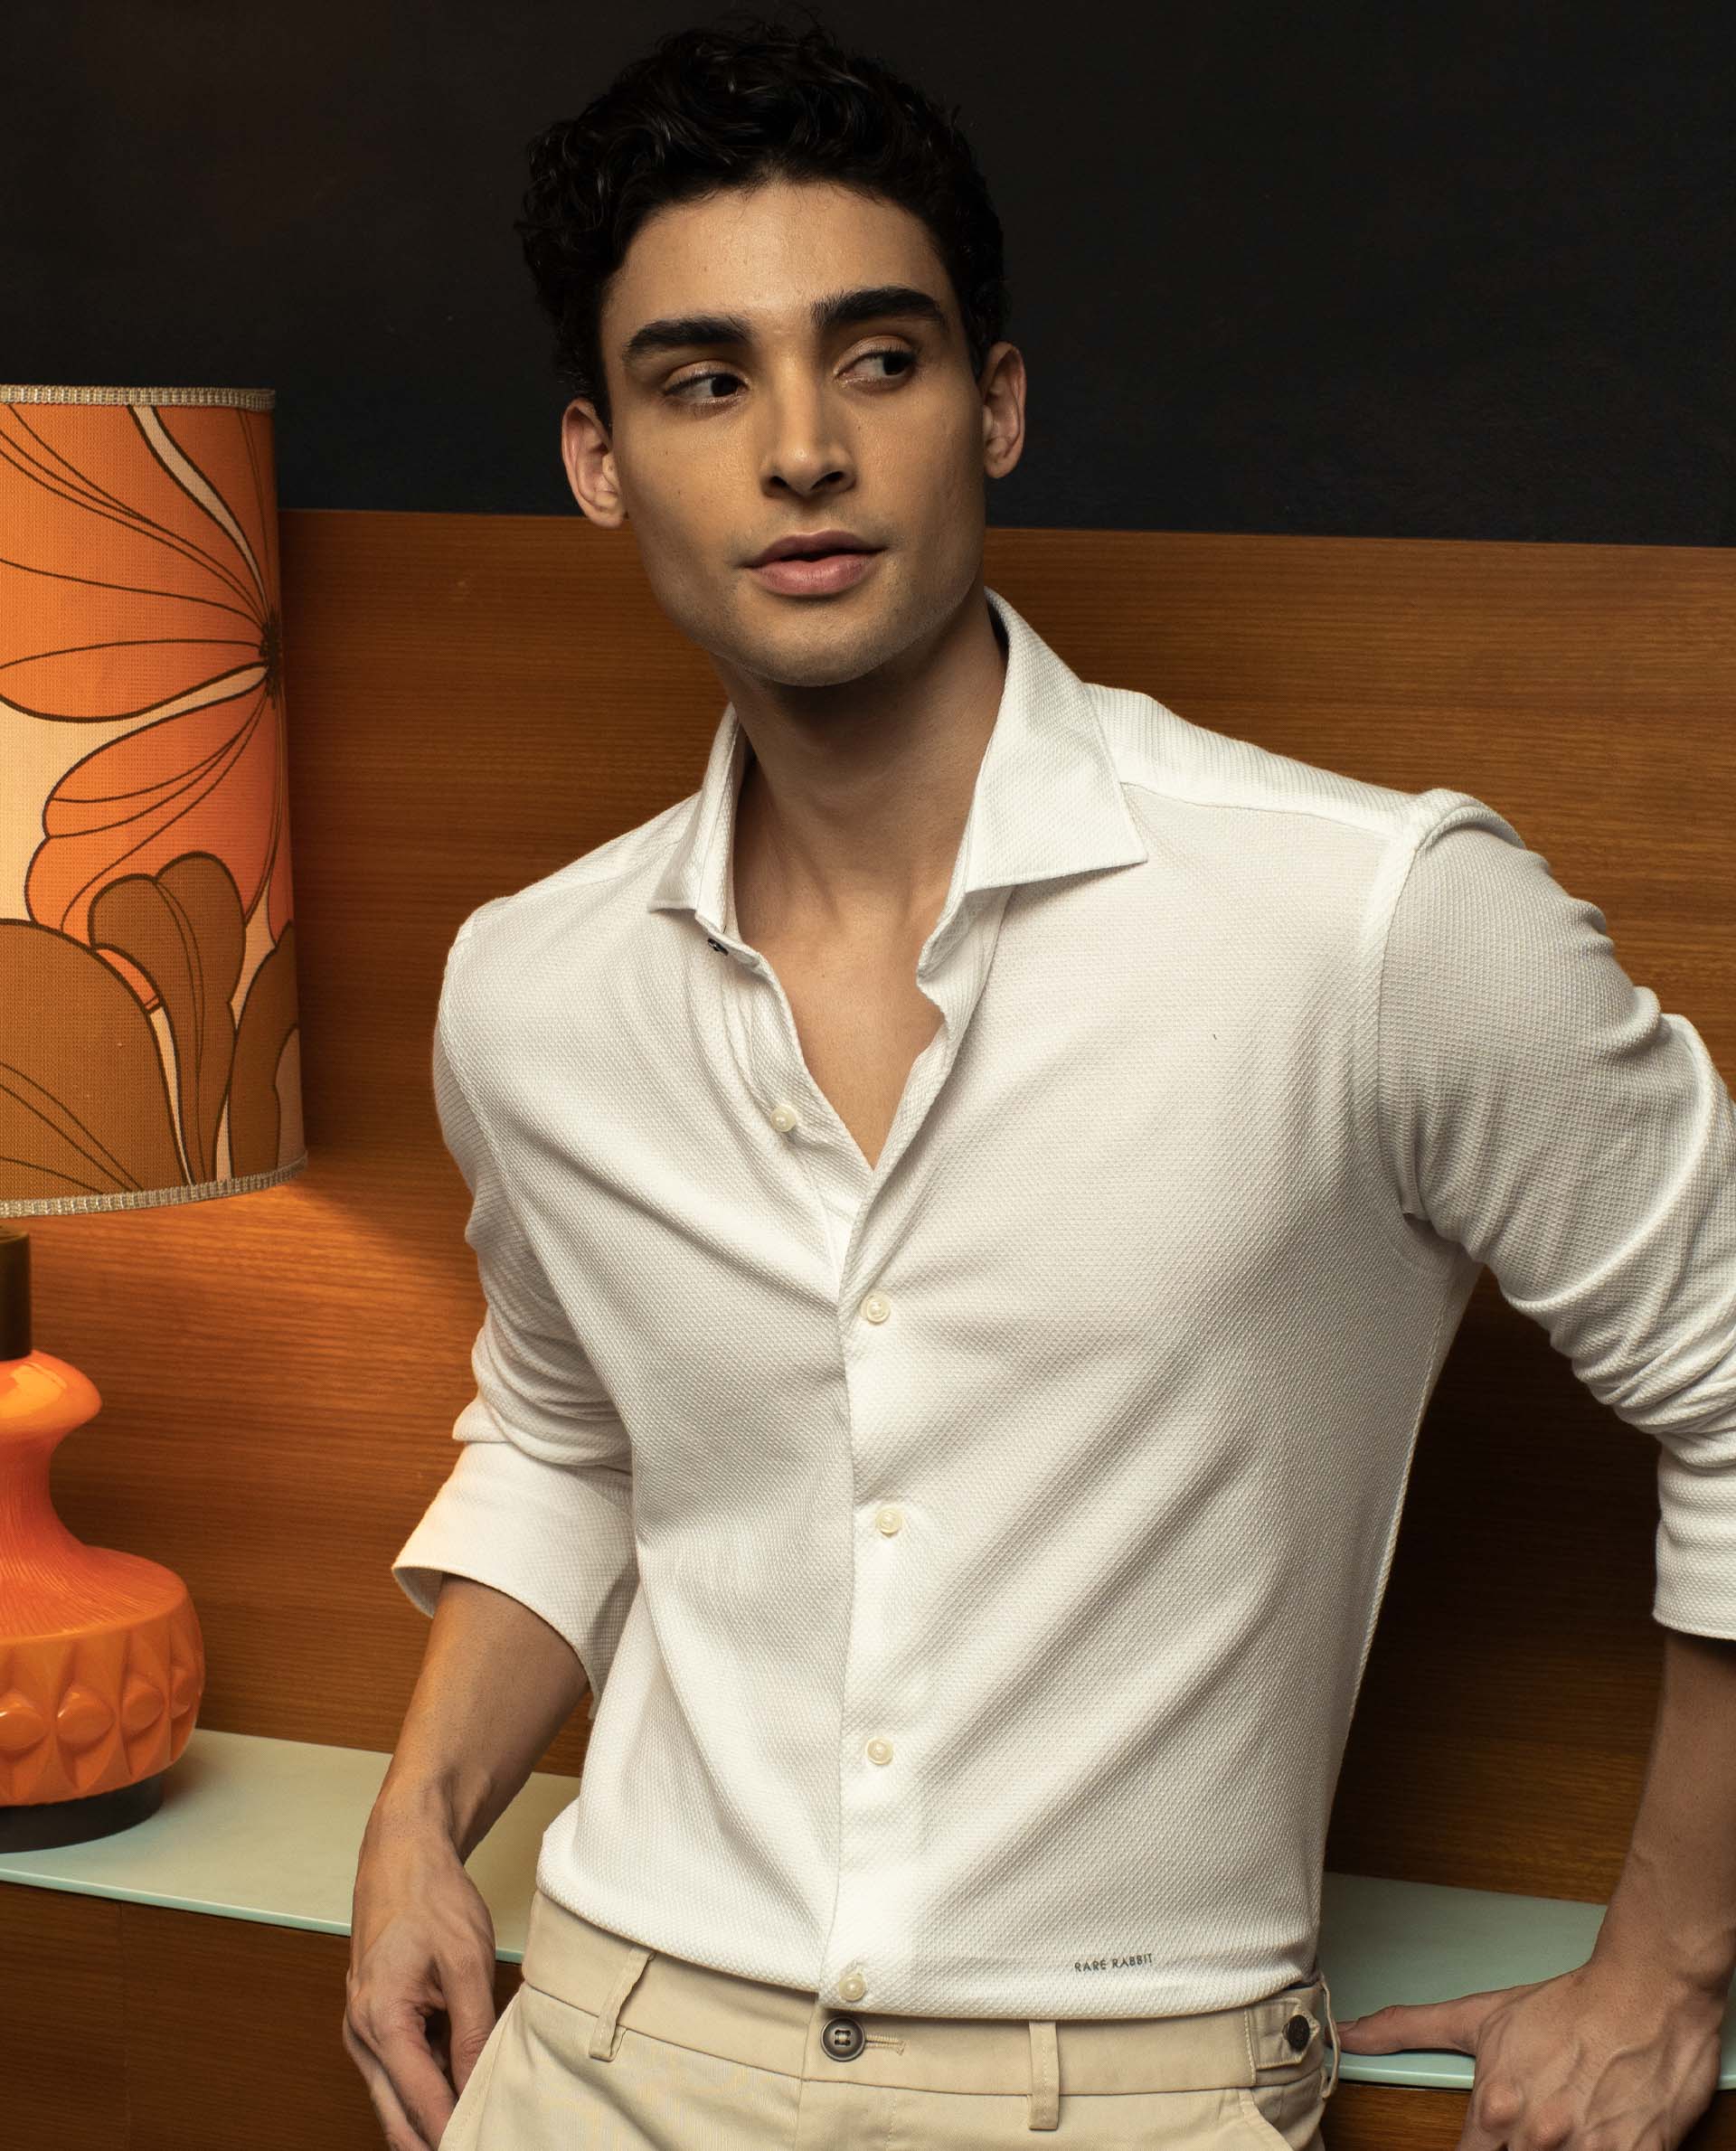 Mens White Shirt Outfits30 Combinations with White Shirts